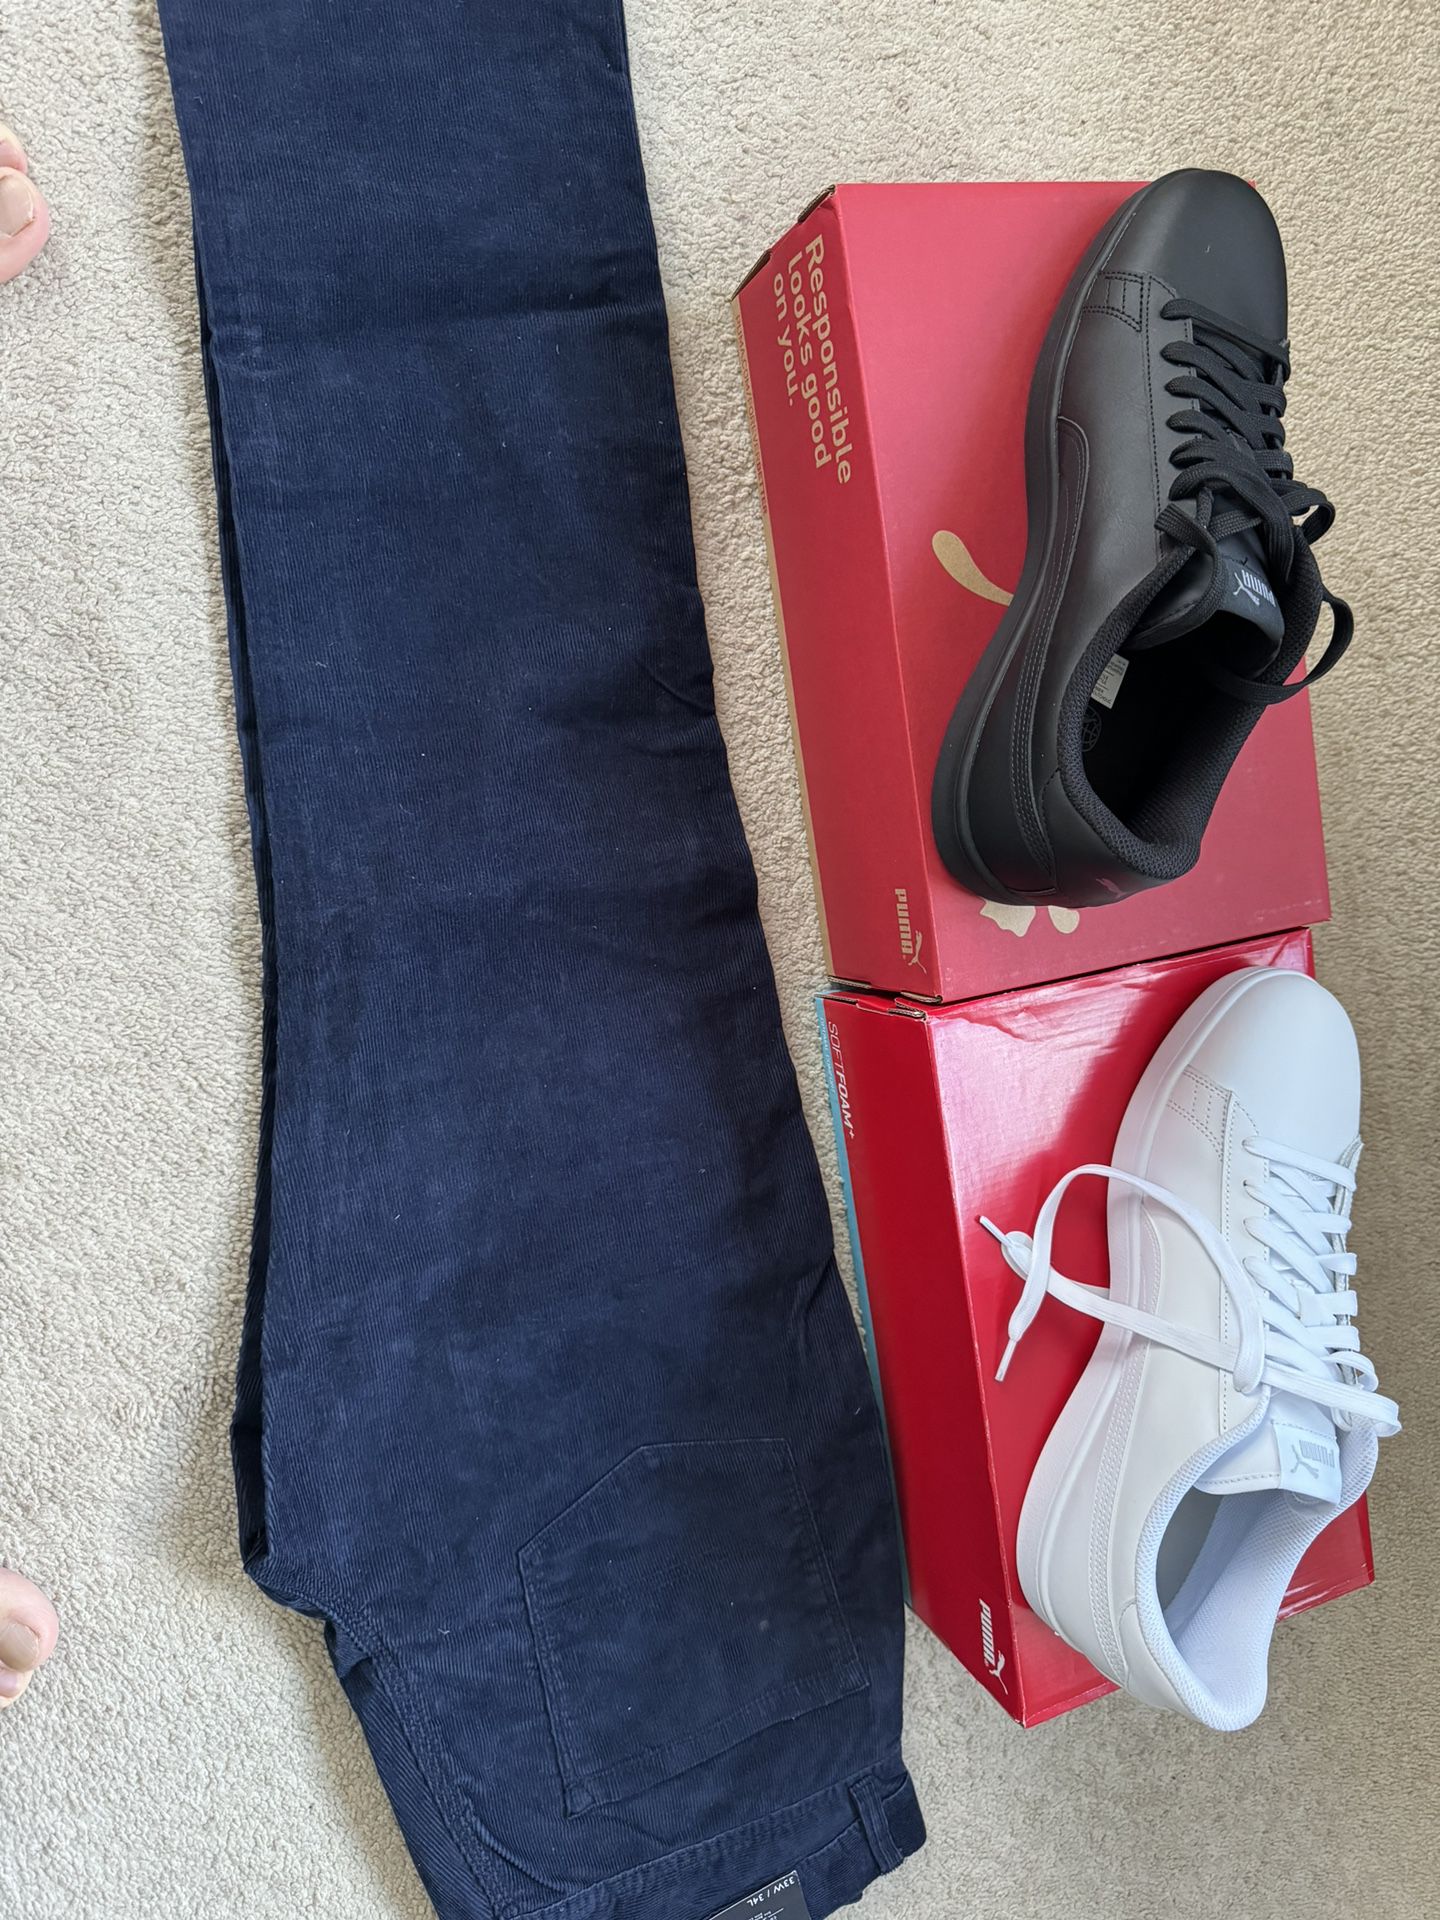 2 Puma Sneakers And Tommy Hilfiger Velvet Pants 